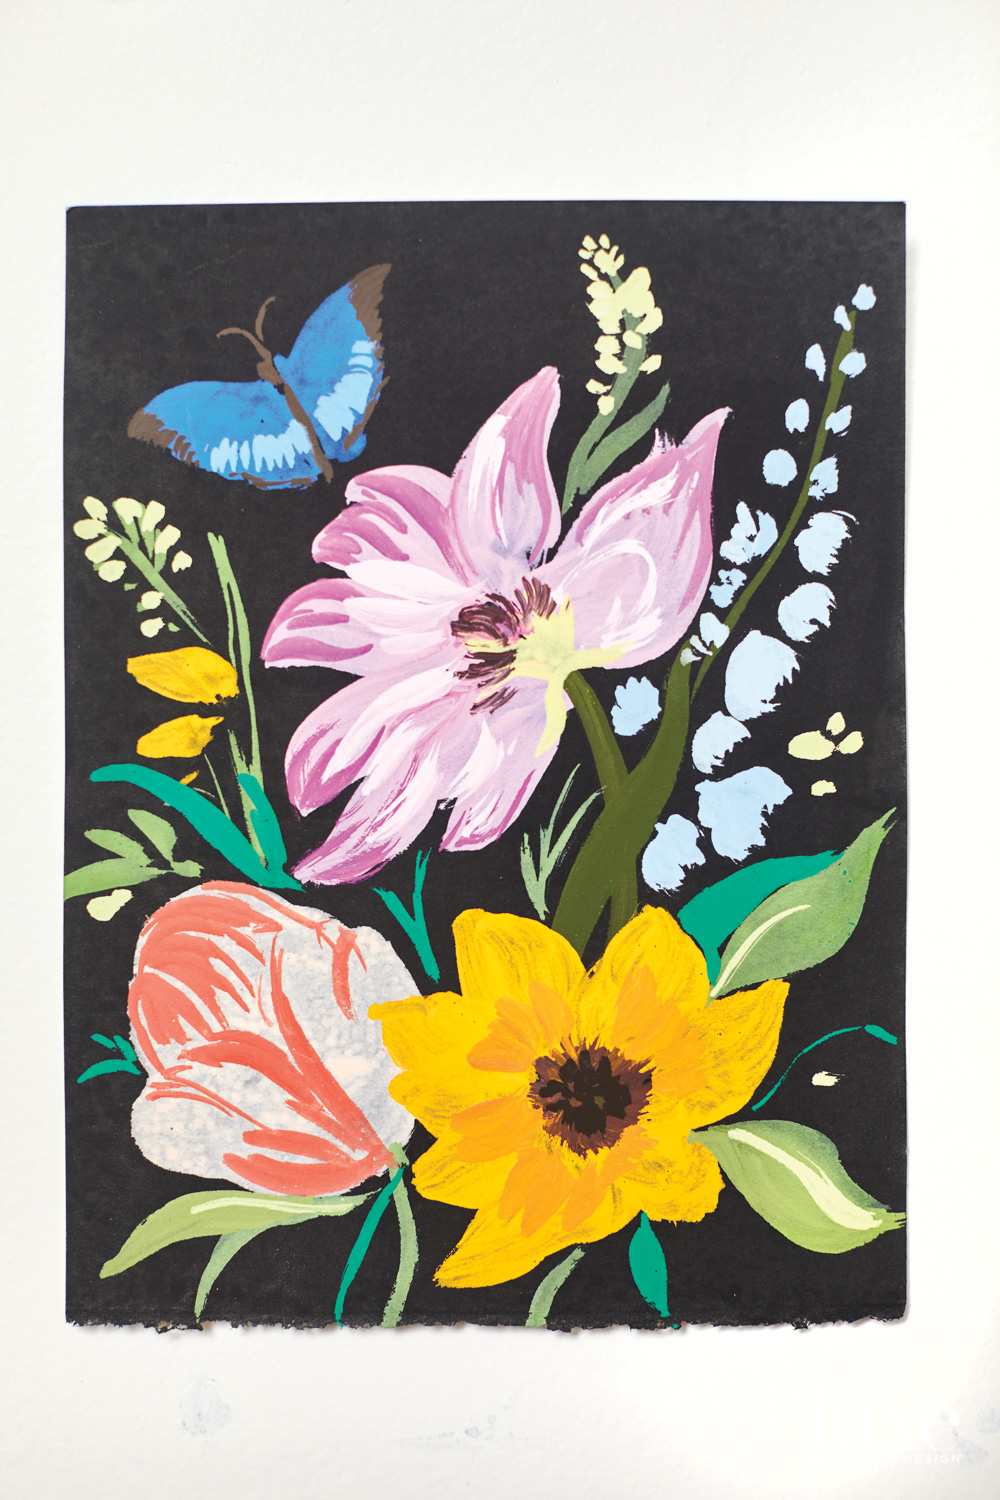 Floral painting with butterfly against a black background